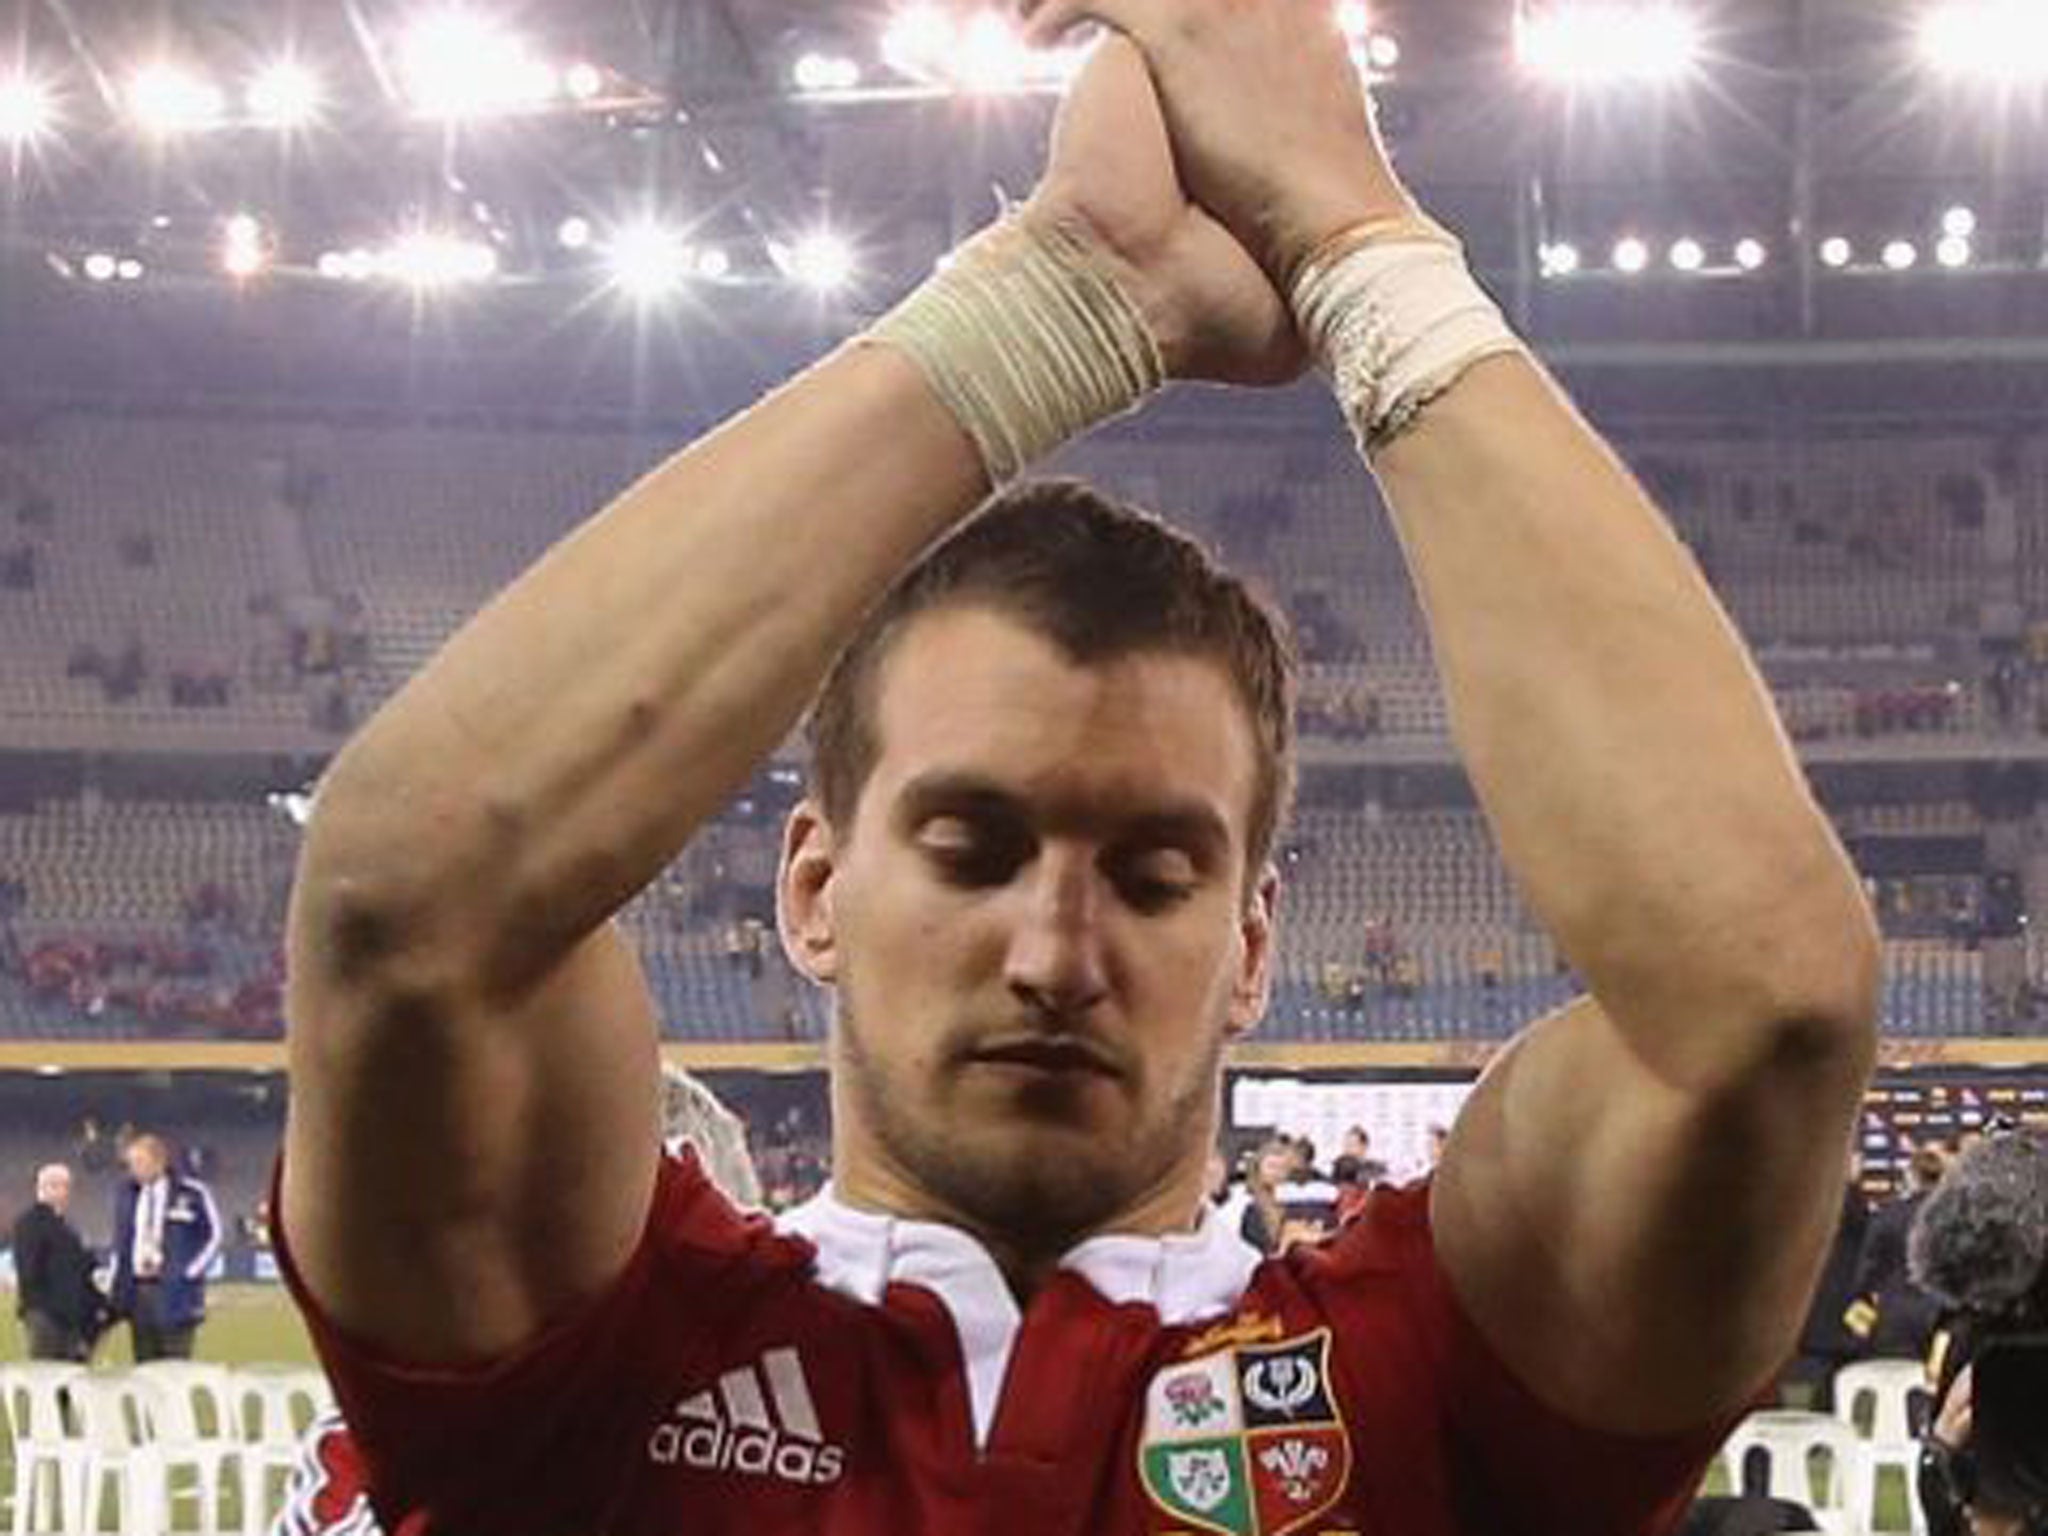 Sam Warburton is ‘incredibly disappointed’ to be out of the tour